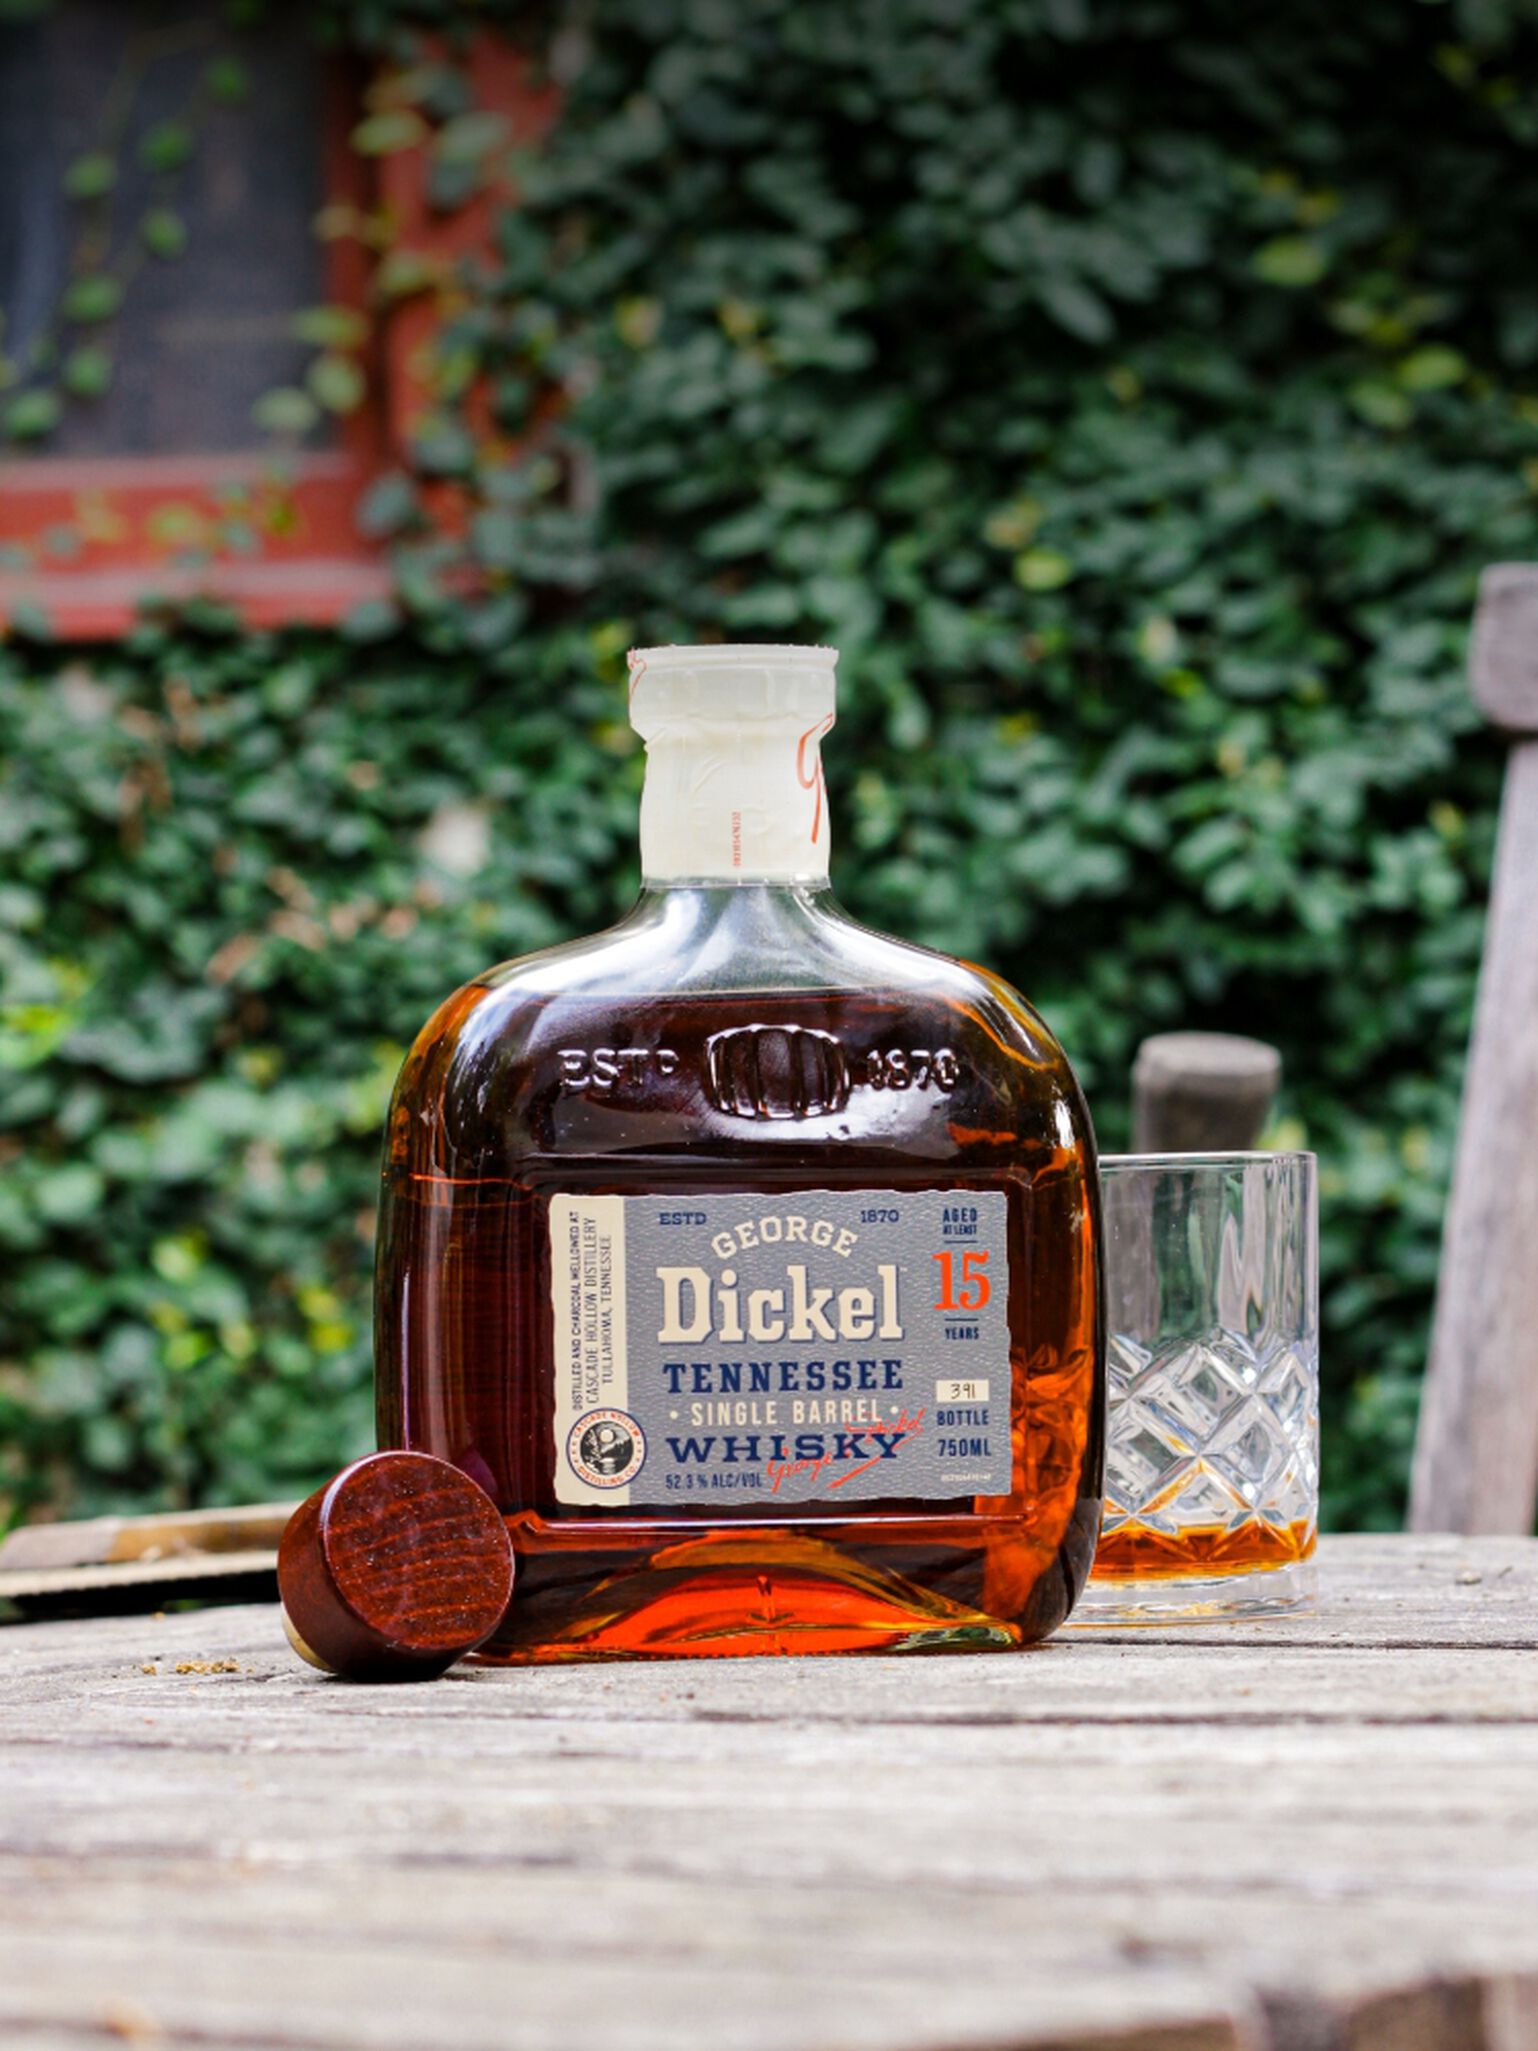 Bottle of George Dickel 15 Year Old Single Barrel S2B28 with rocks glass witting on a table outside